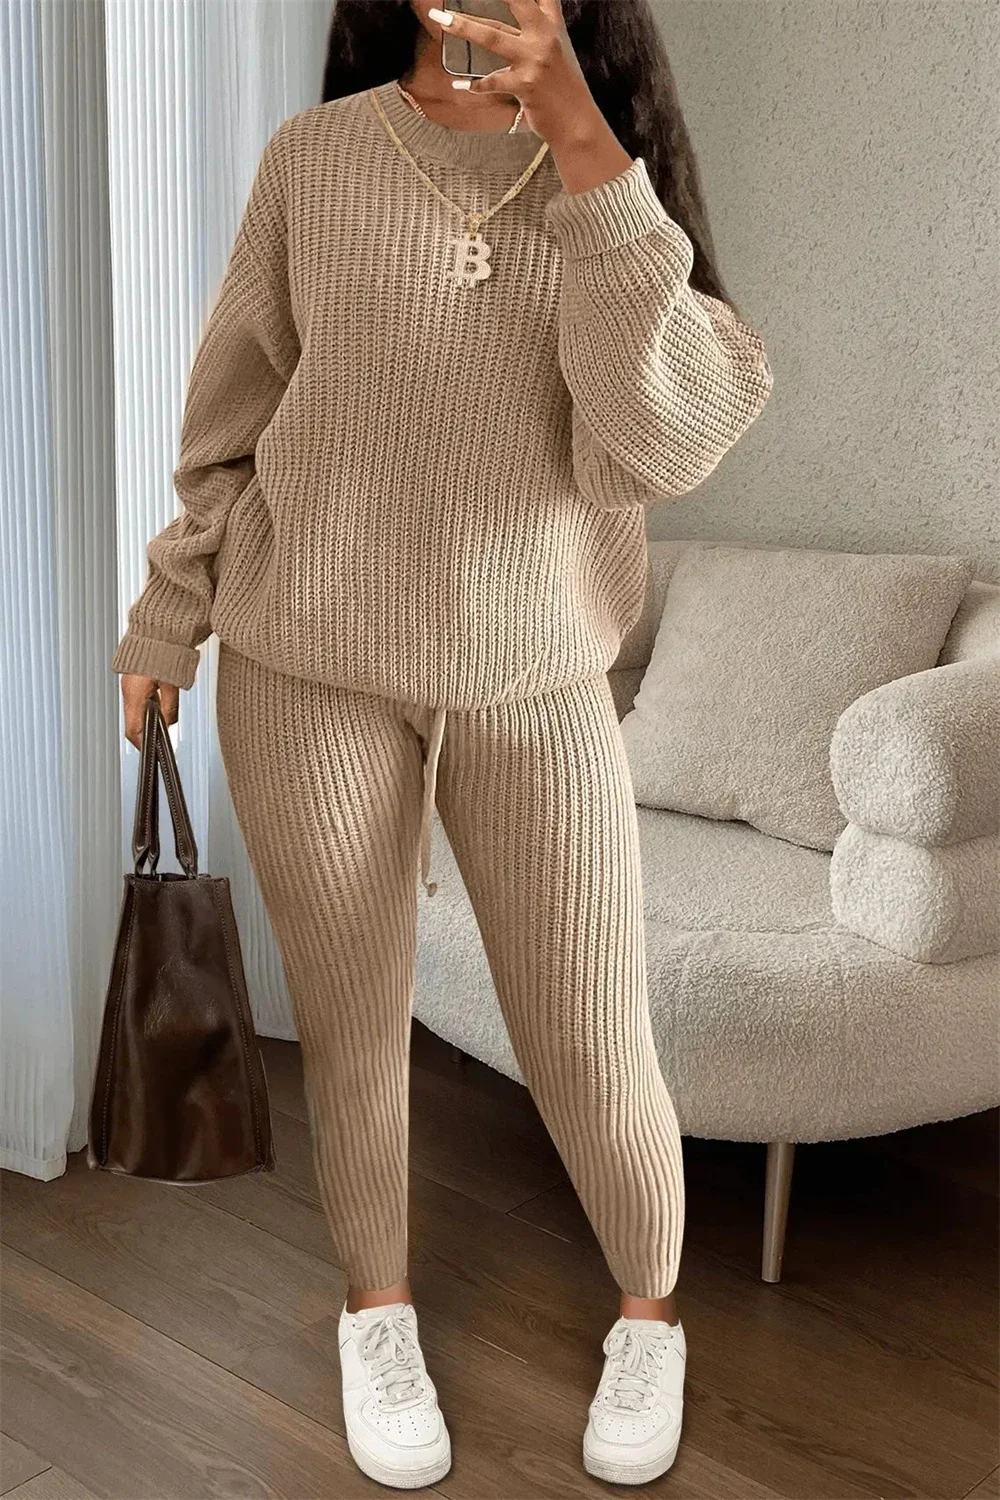 New Autumn Winter Women Knitted Tracksuit Two Piece Set Female Sweater Tops + Elastic Waist Pant Knitted Suit Women Outfits